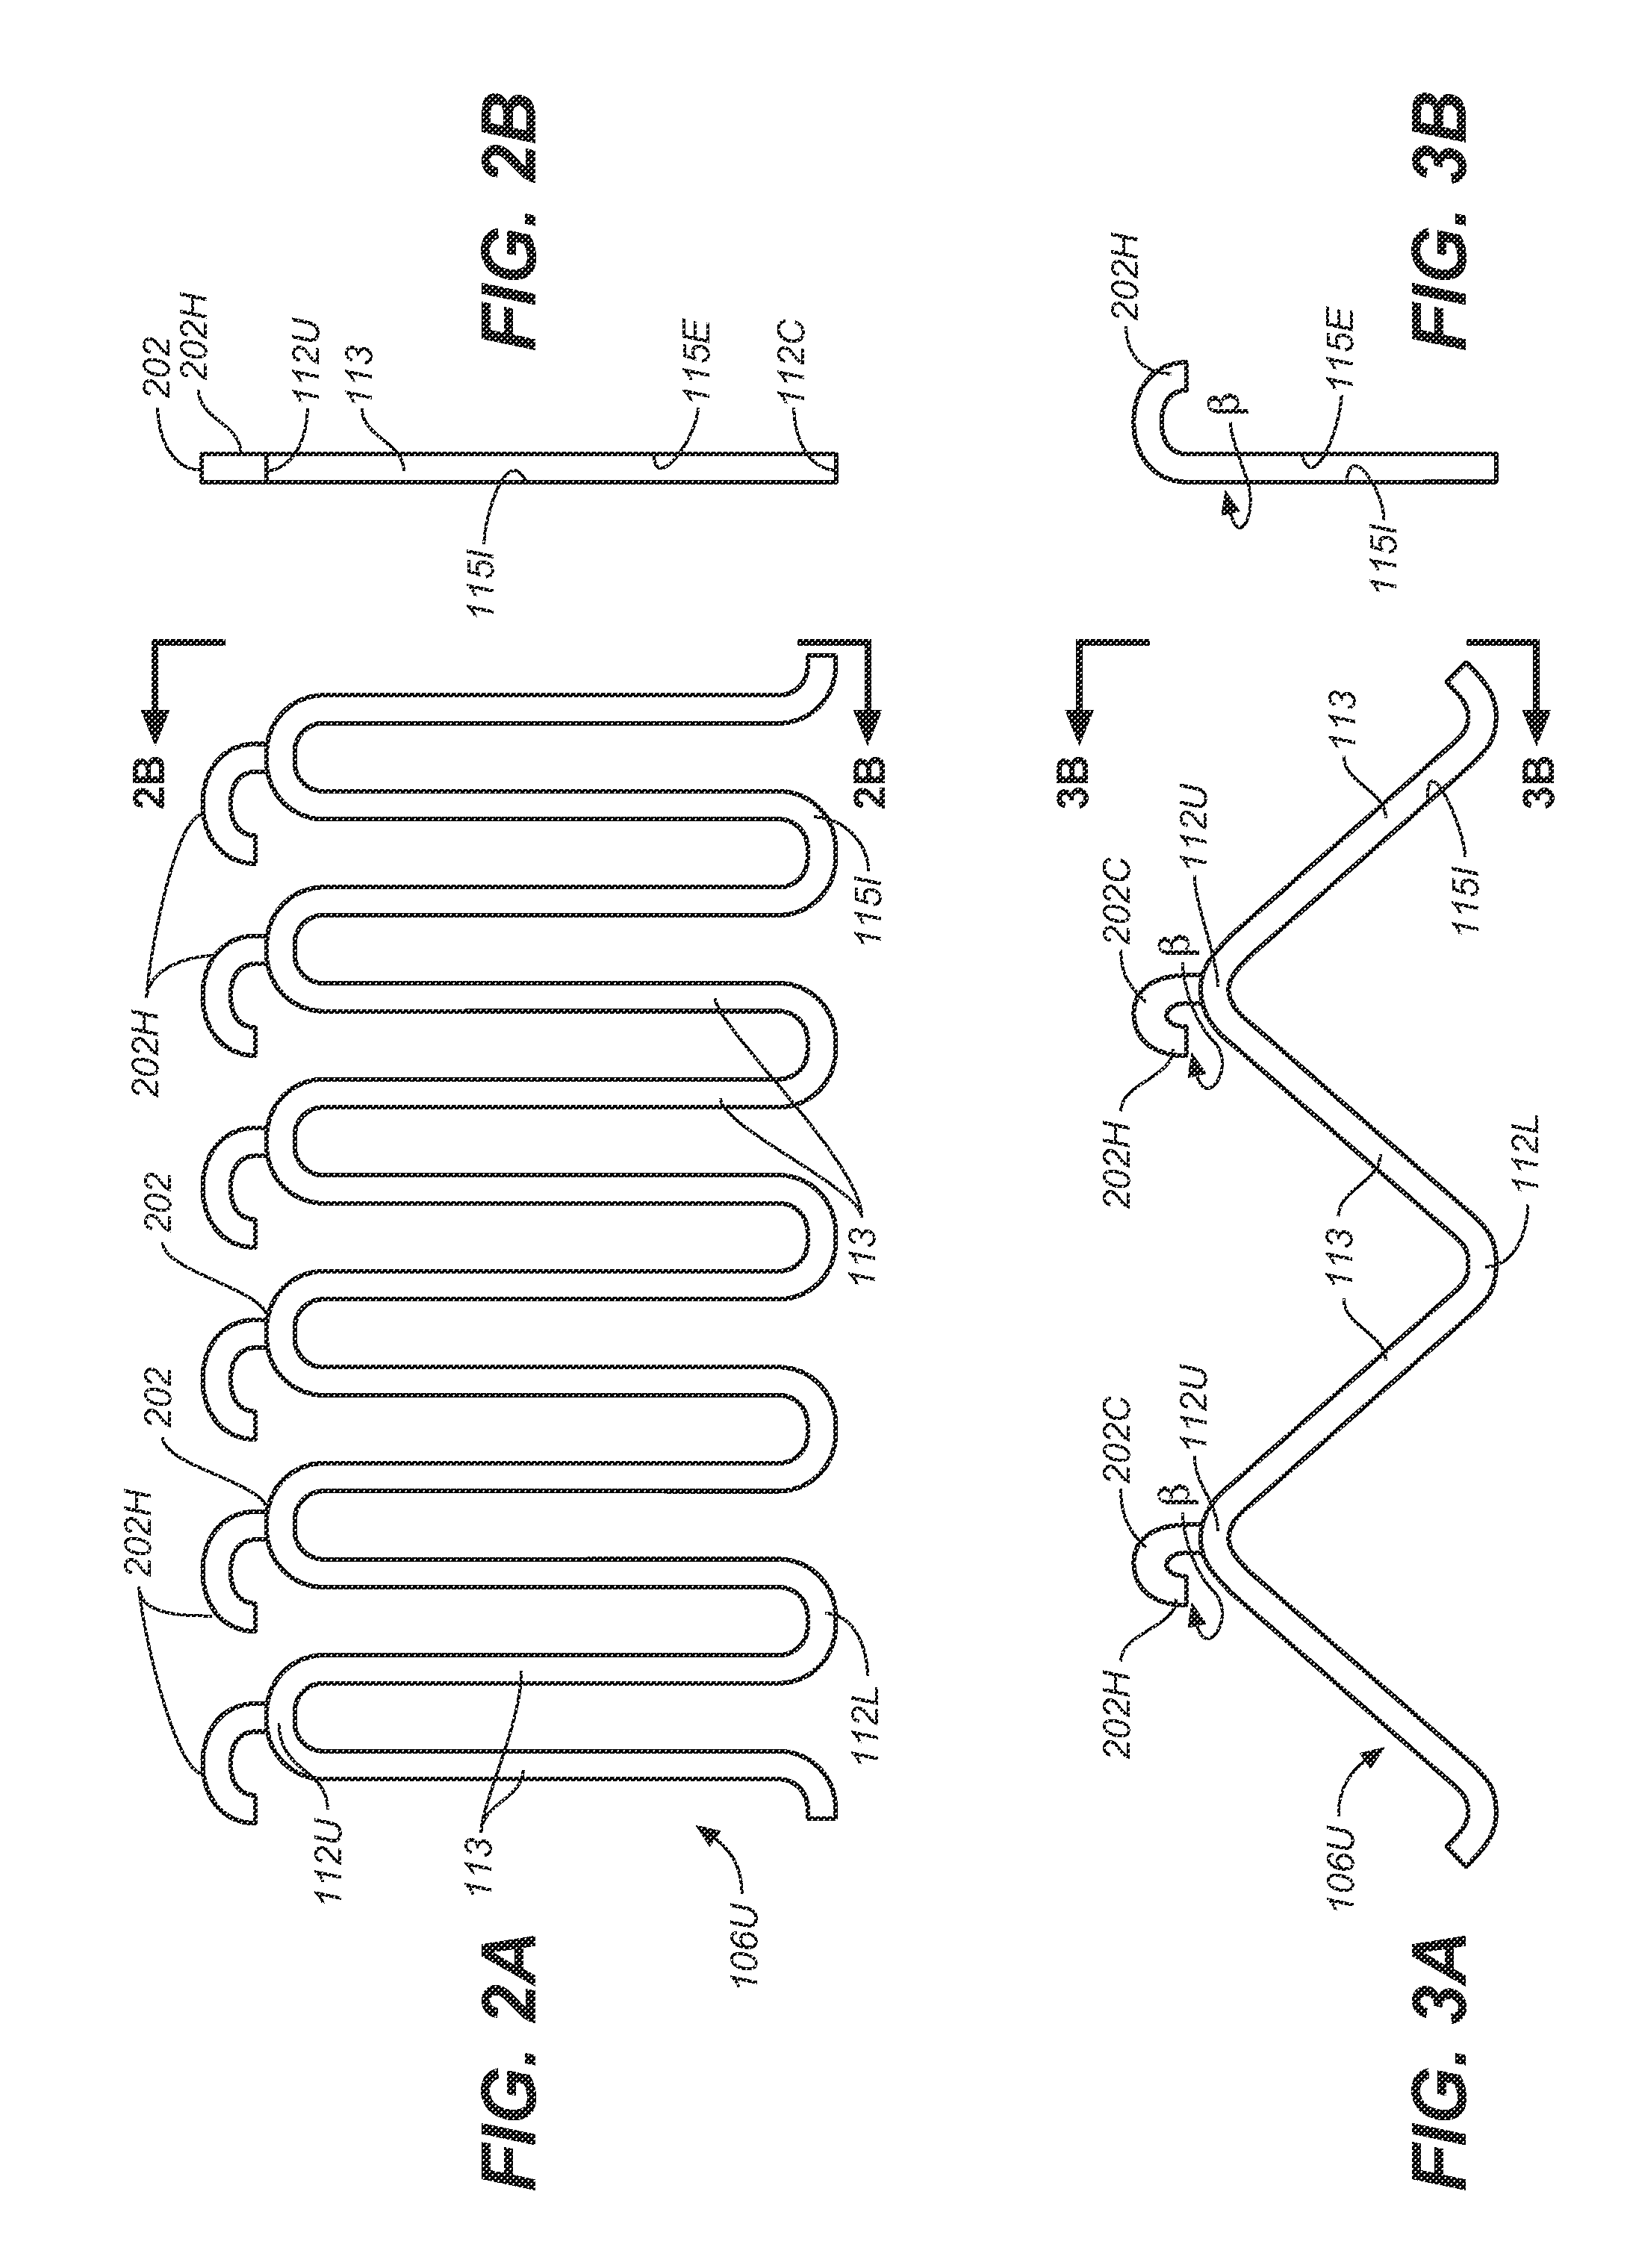 Self-flaring active fixation element for a stent graft